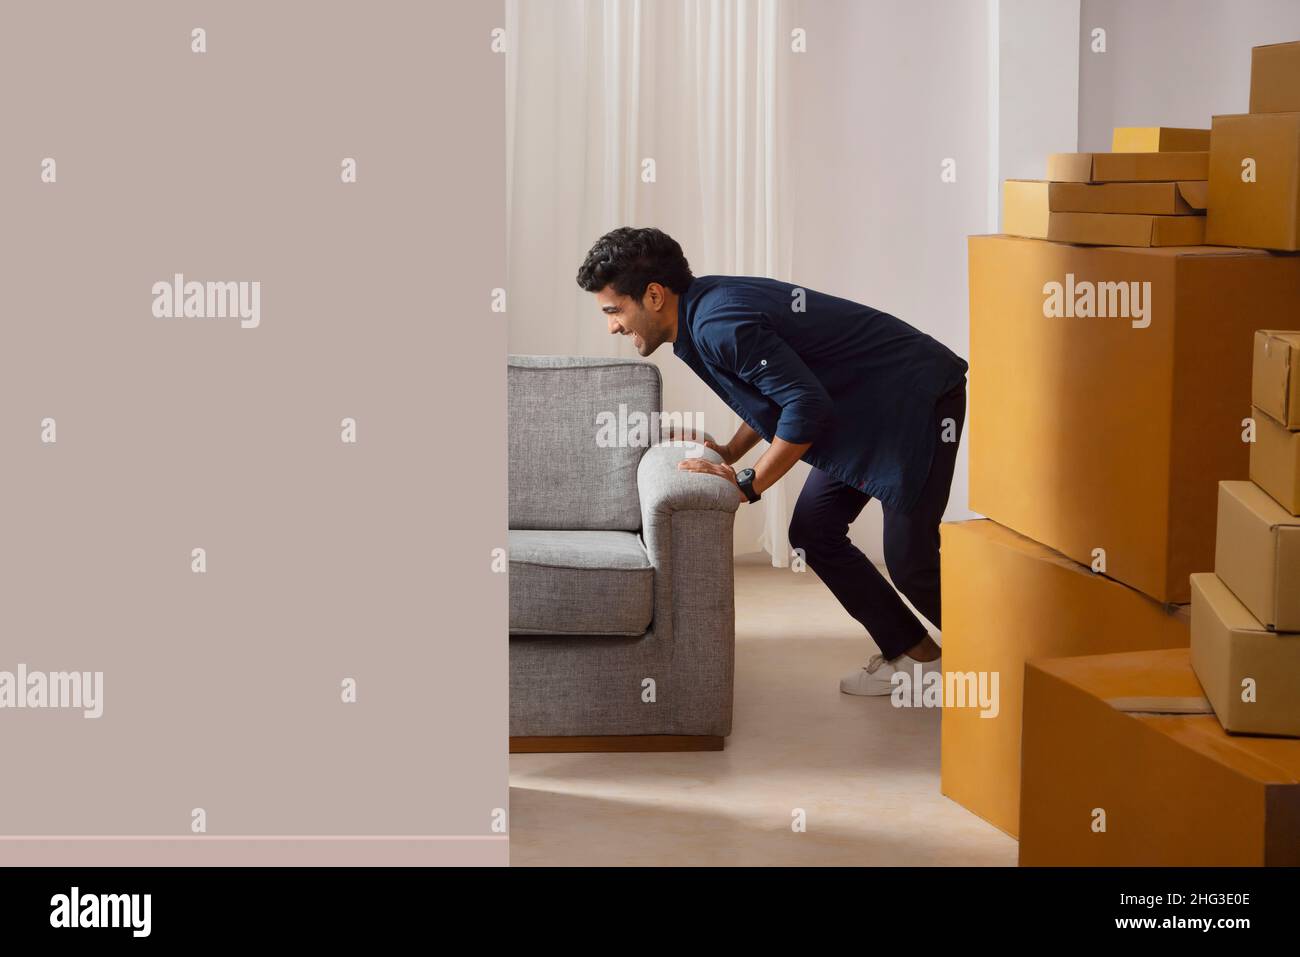 Adult boy alone trying to move sofa Stock Photo